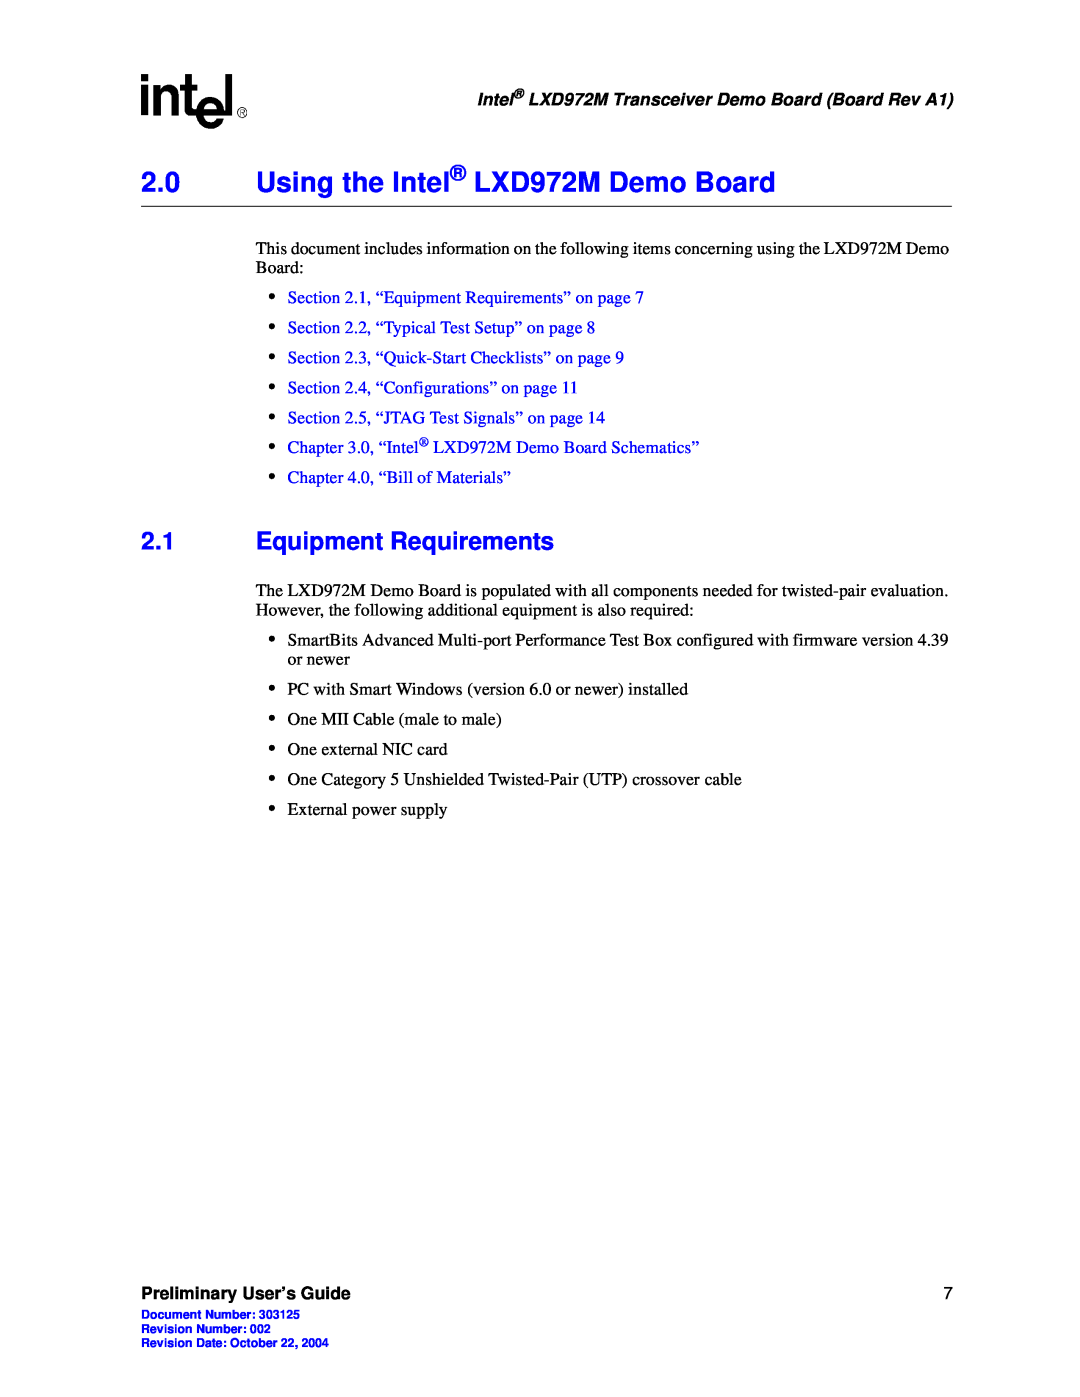 Intel manual 2.0Using the Intel LXD972M Demo Board, 2.1Equipment Requirements, Preliminary User’s Guide 